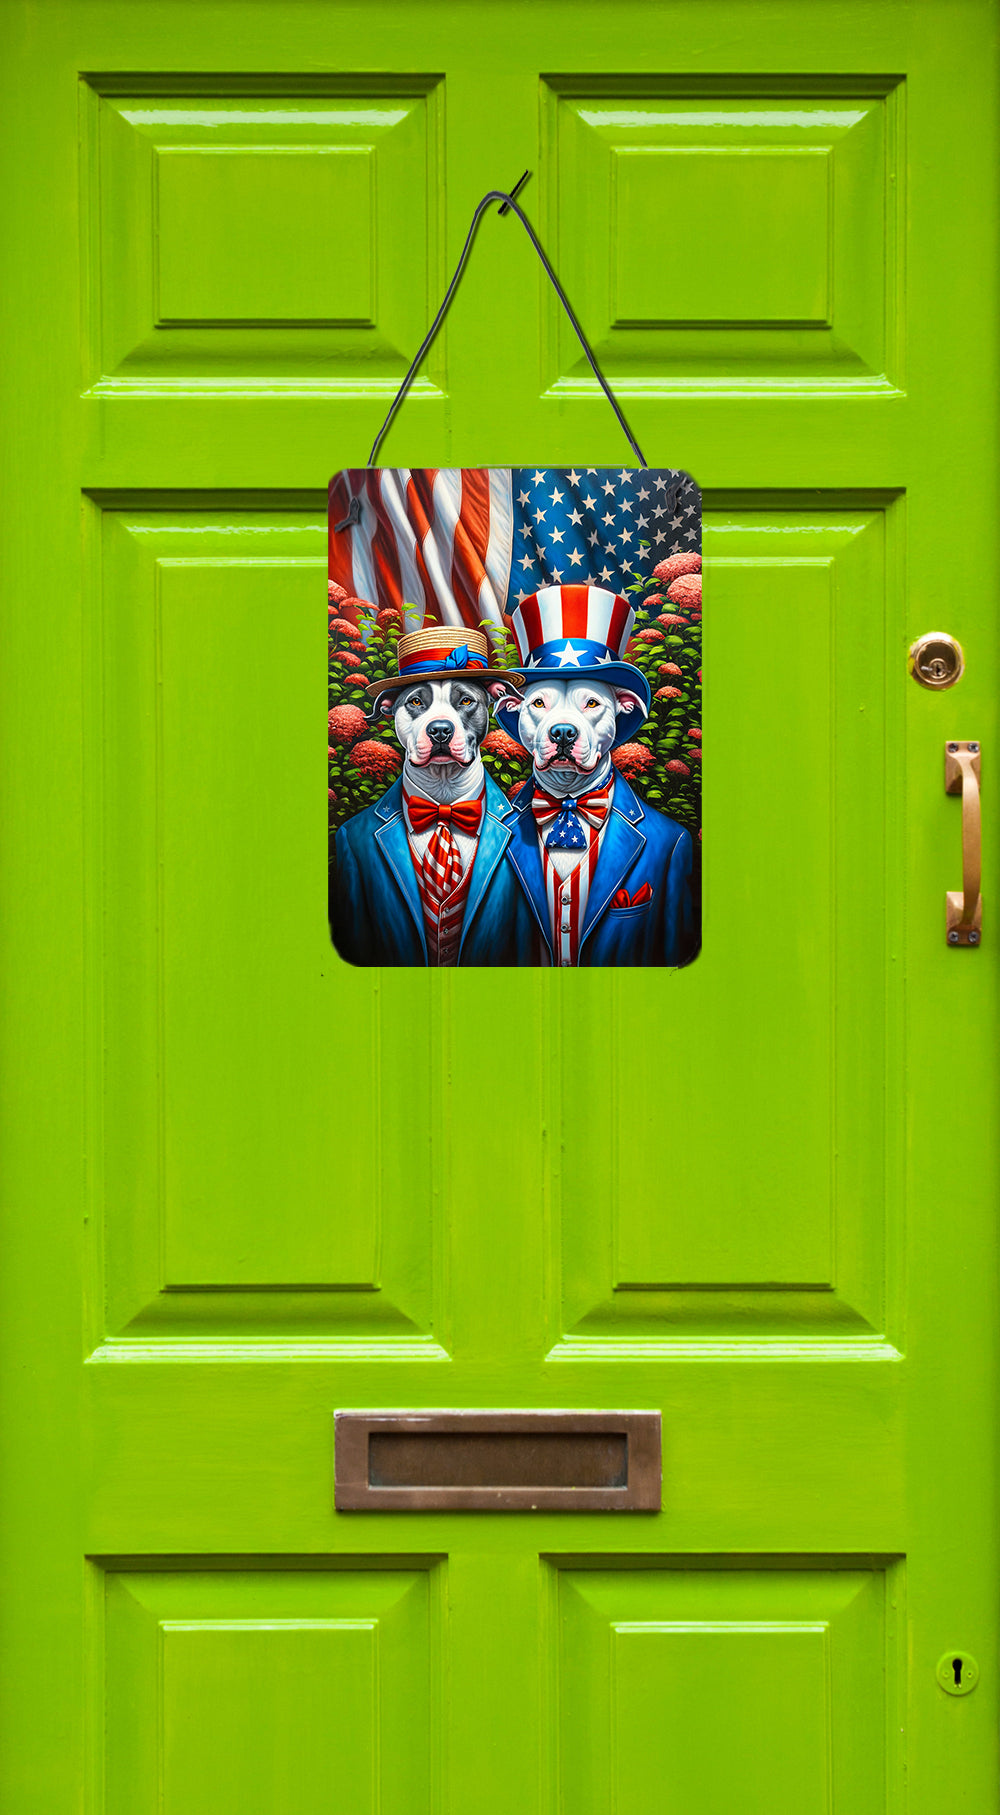 Buy this All American Pit Bull Terrier Wall or Door Hanging Prints